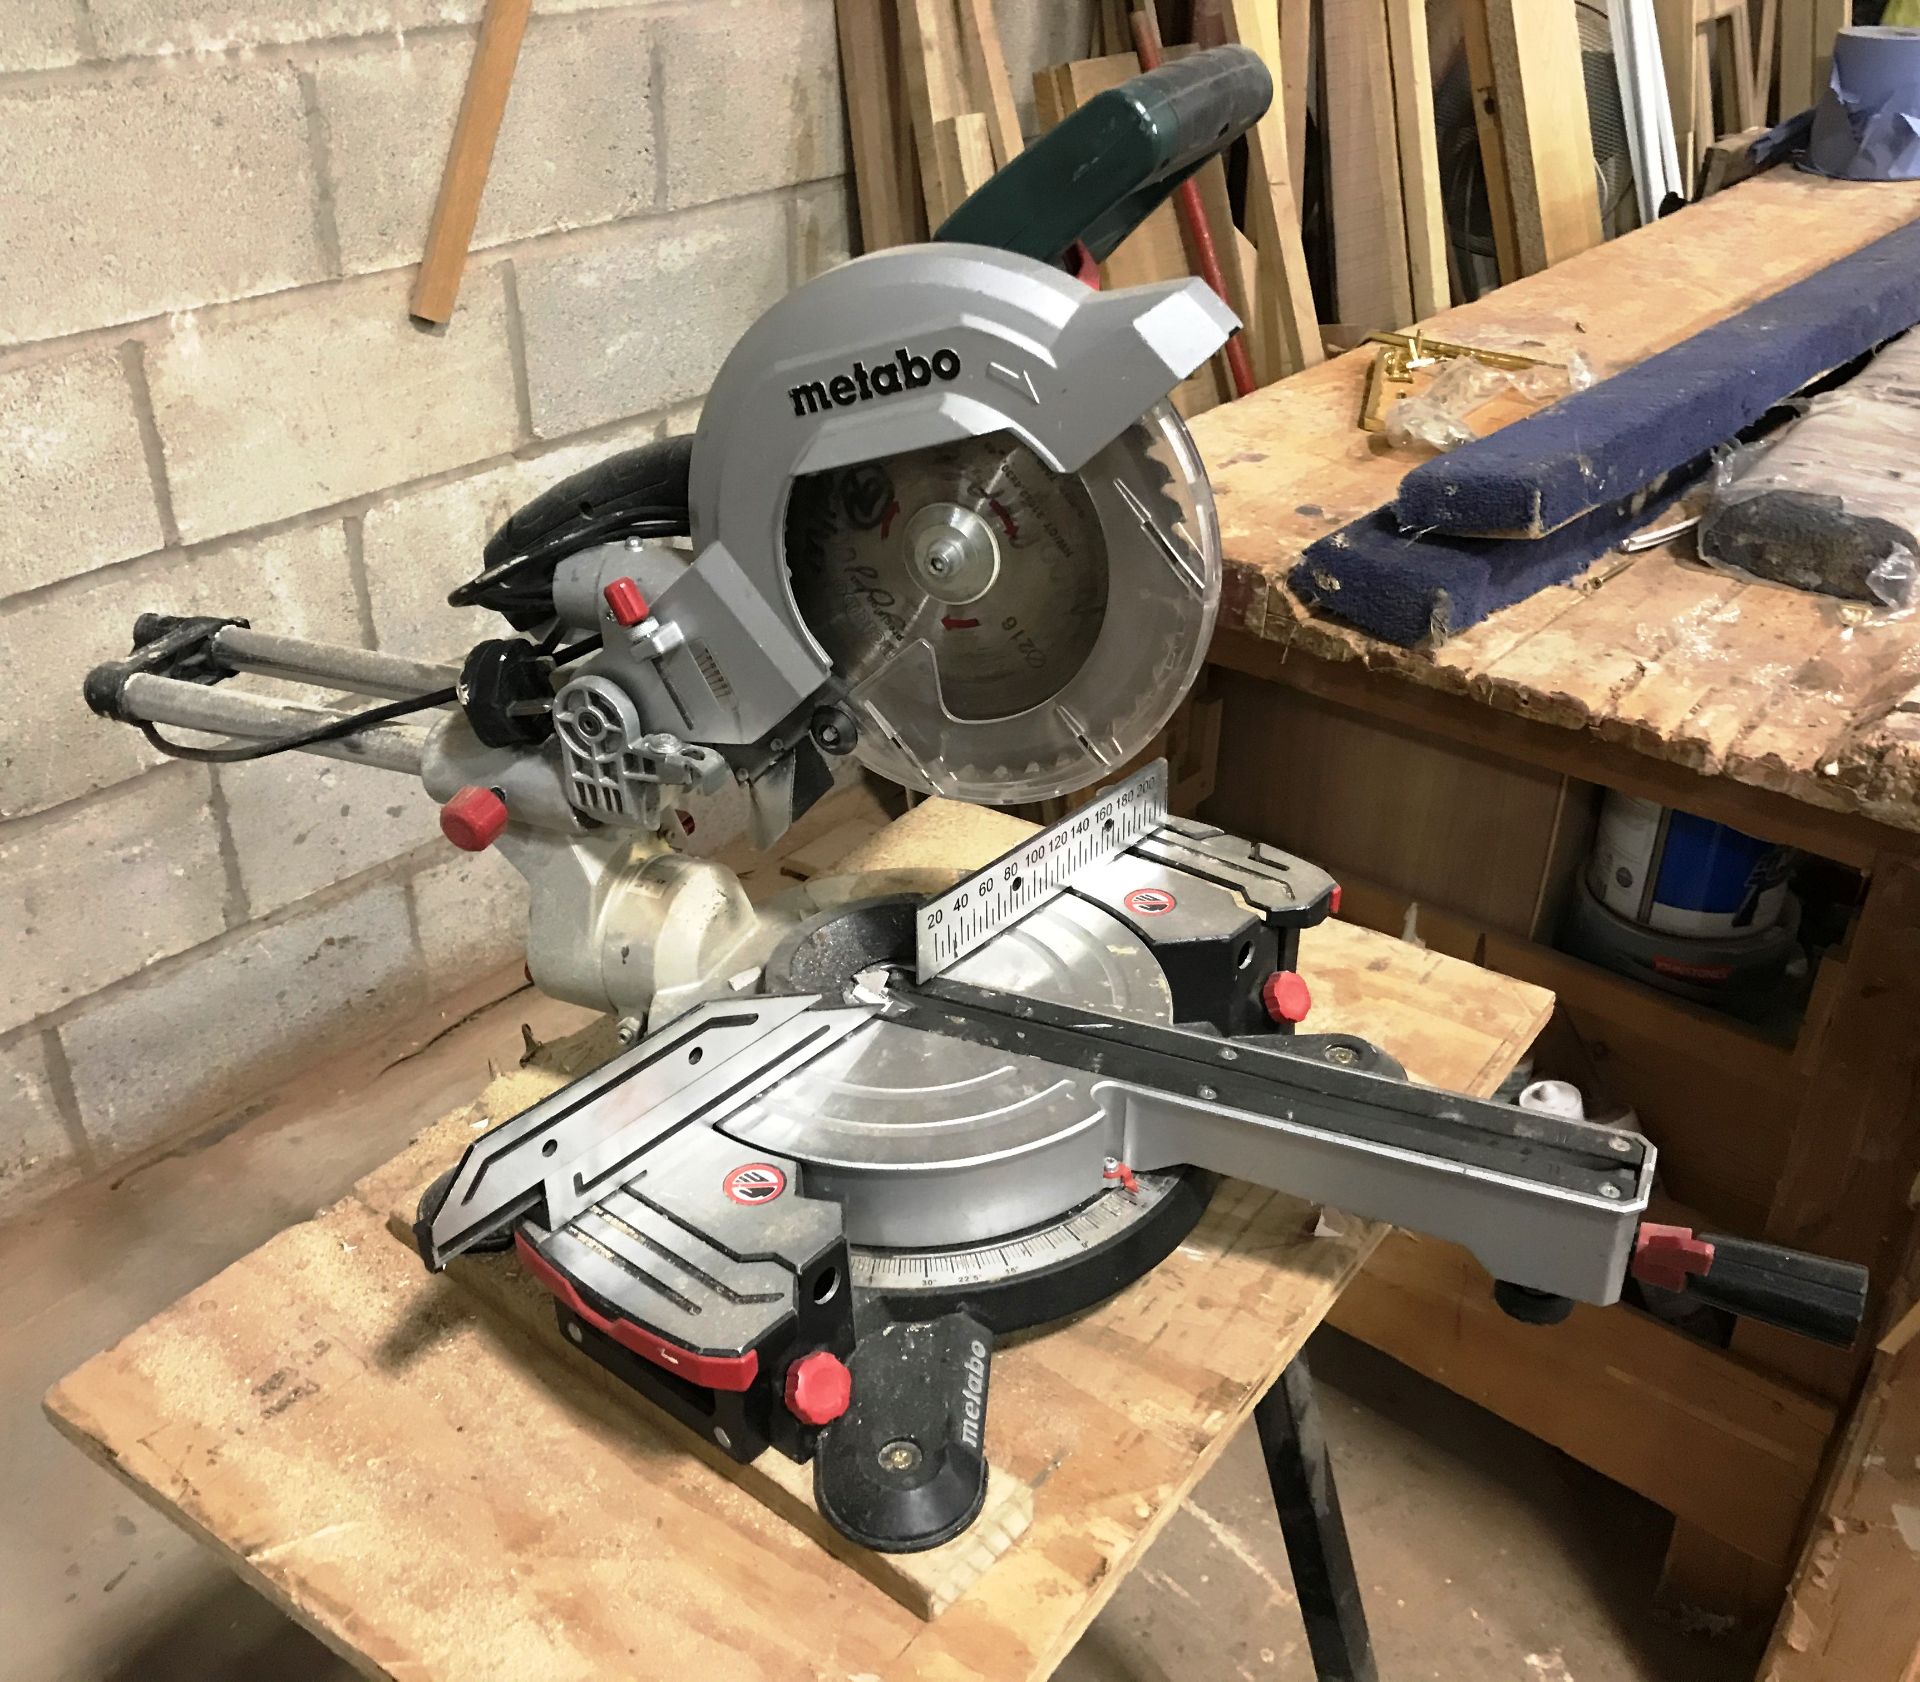 Metabo KGS 216 M Mitre Saw w/ Bench | 220-240v - Image 2 of 3